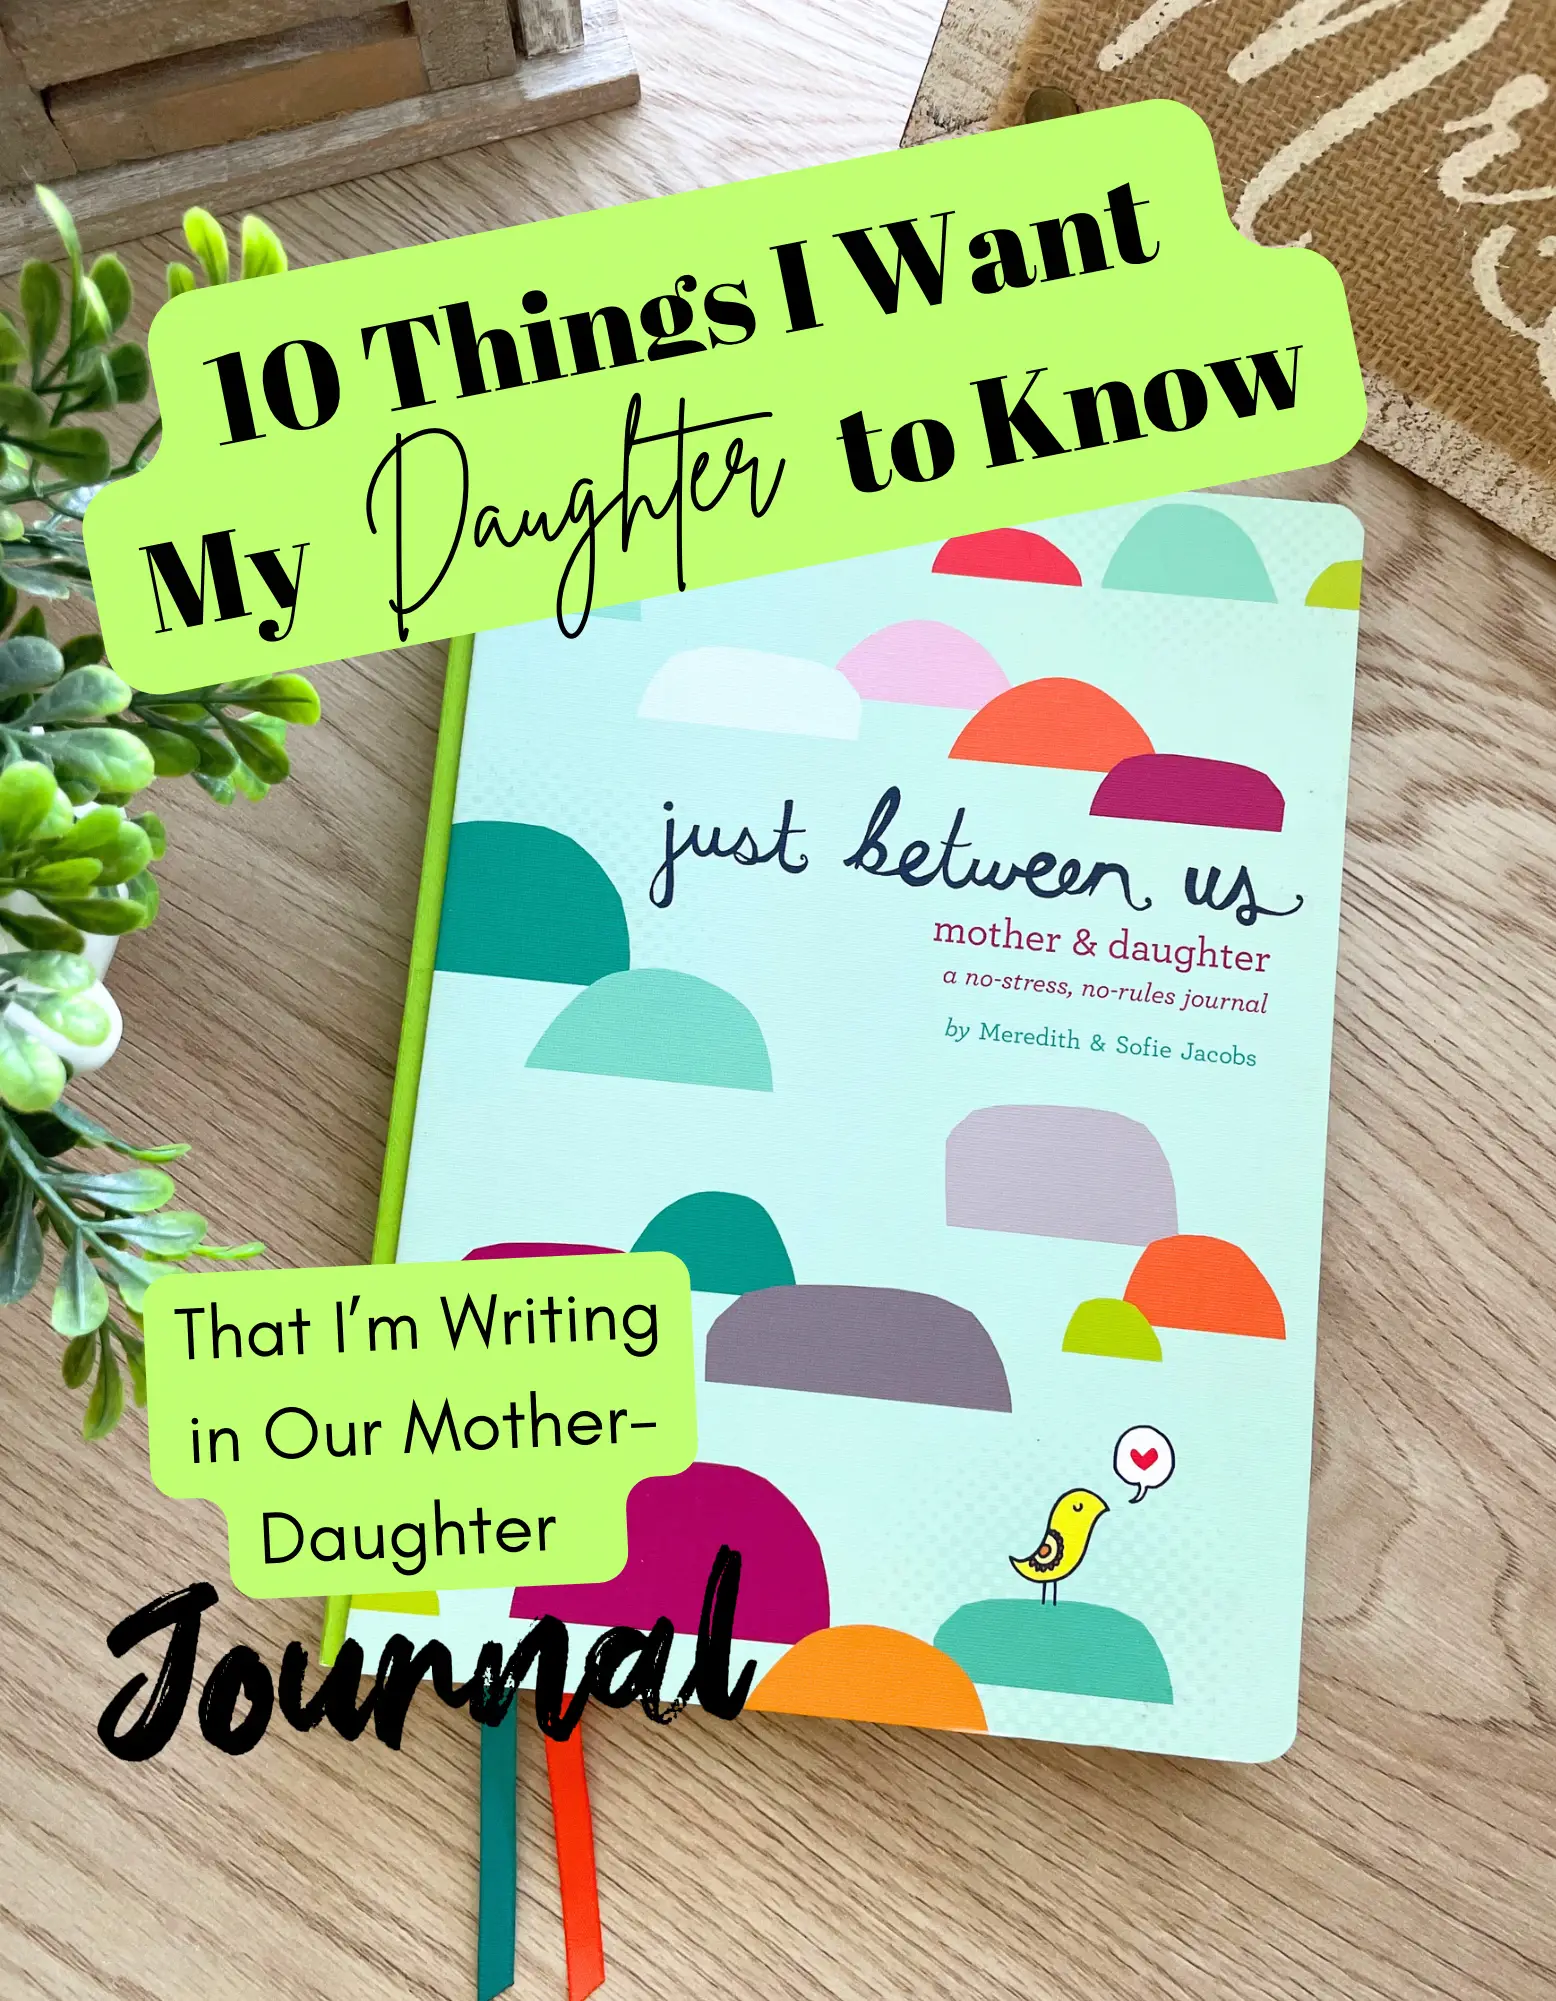 Just Between Us: Mother & Daughter: A No-Stress, No-Rules Journal [Book]